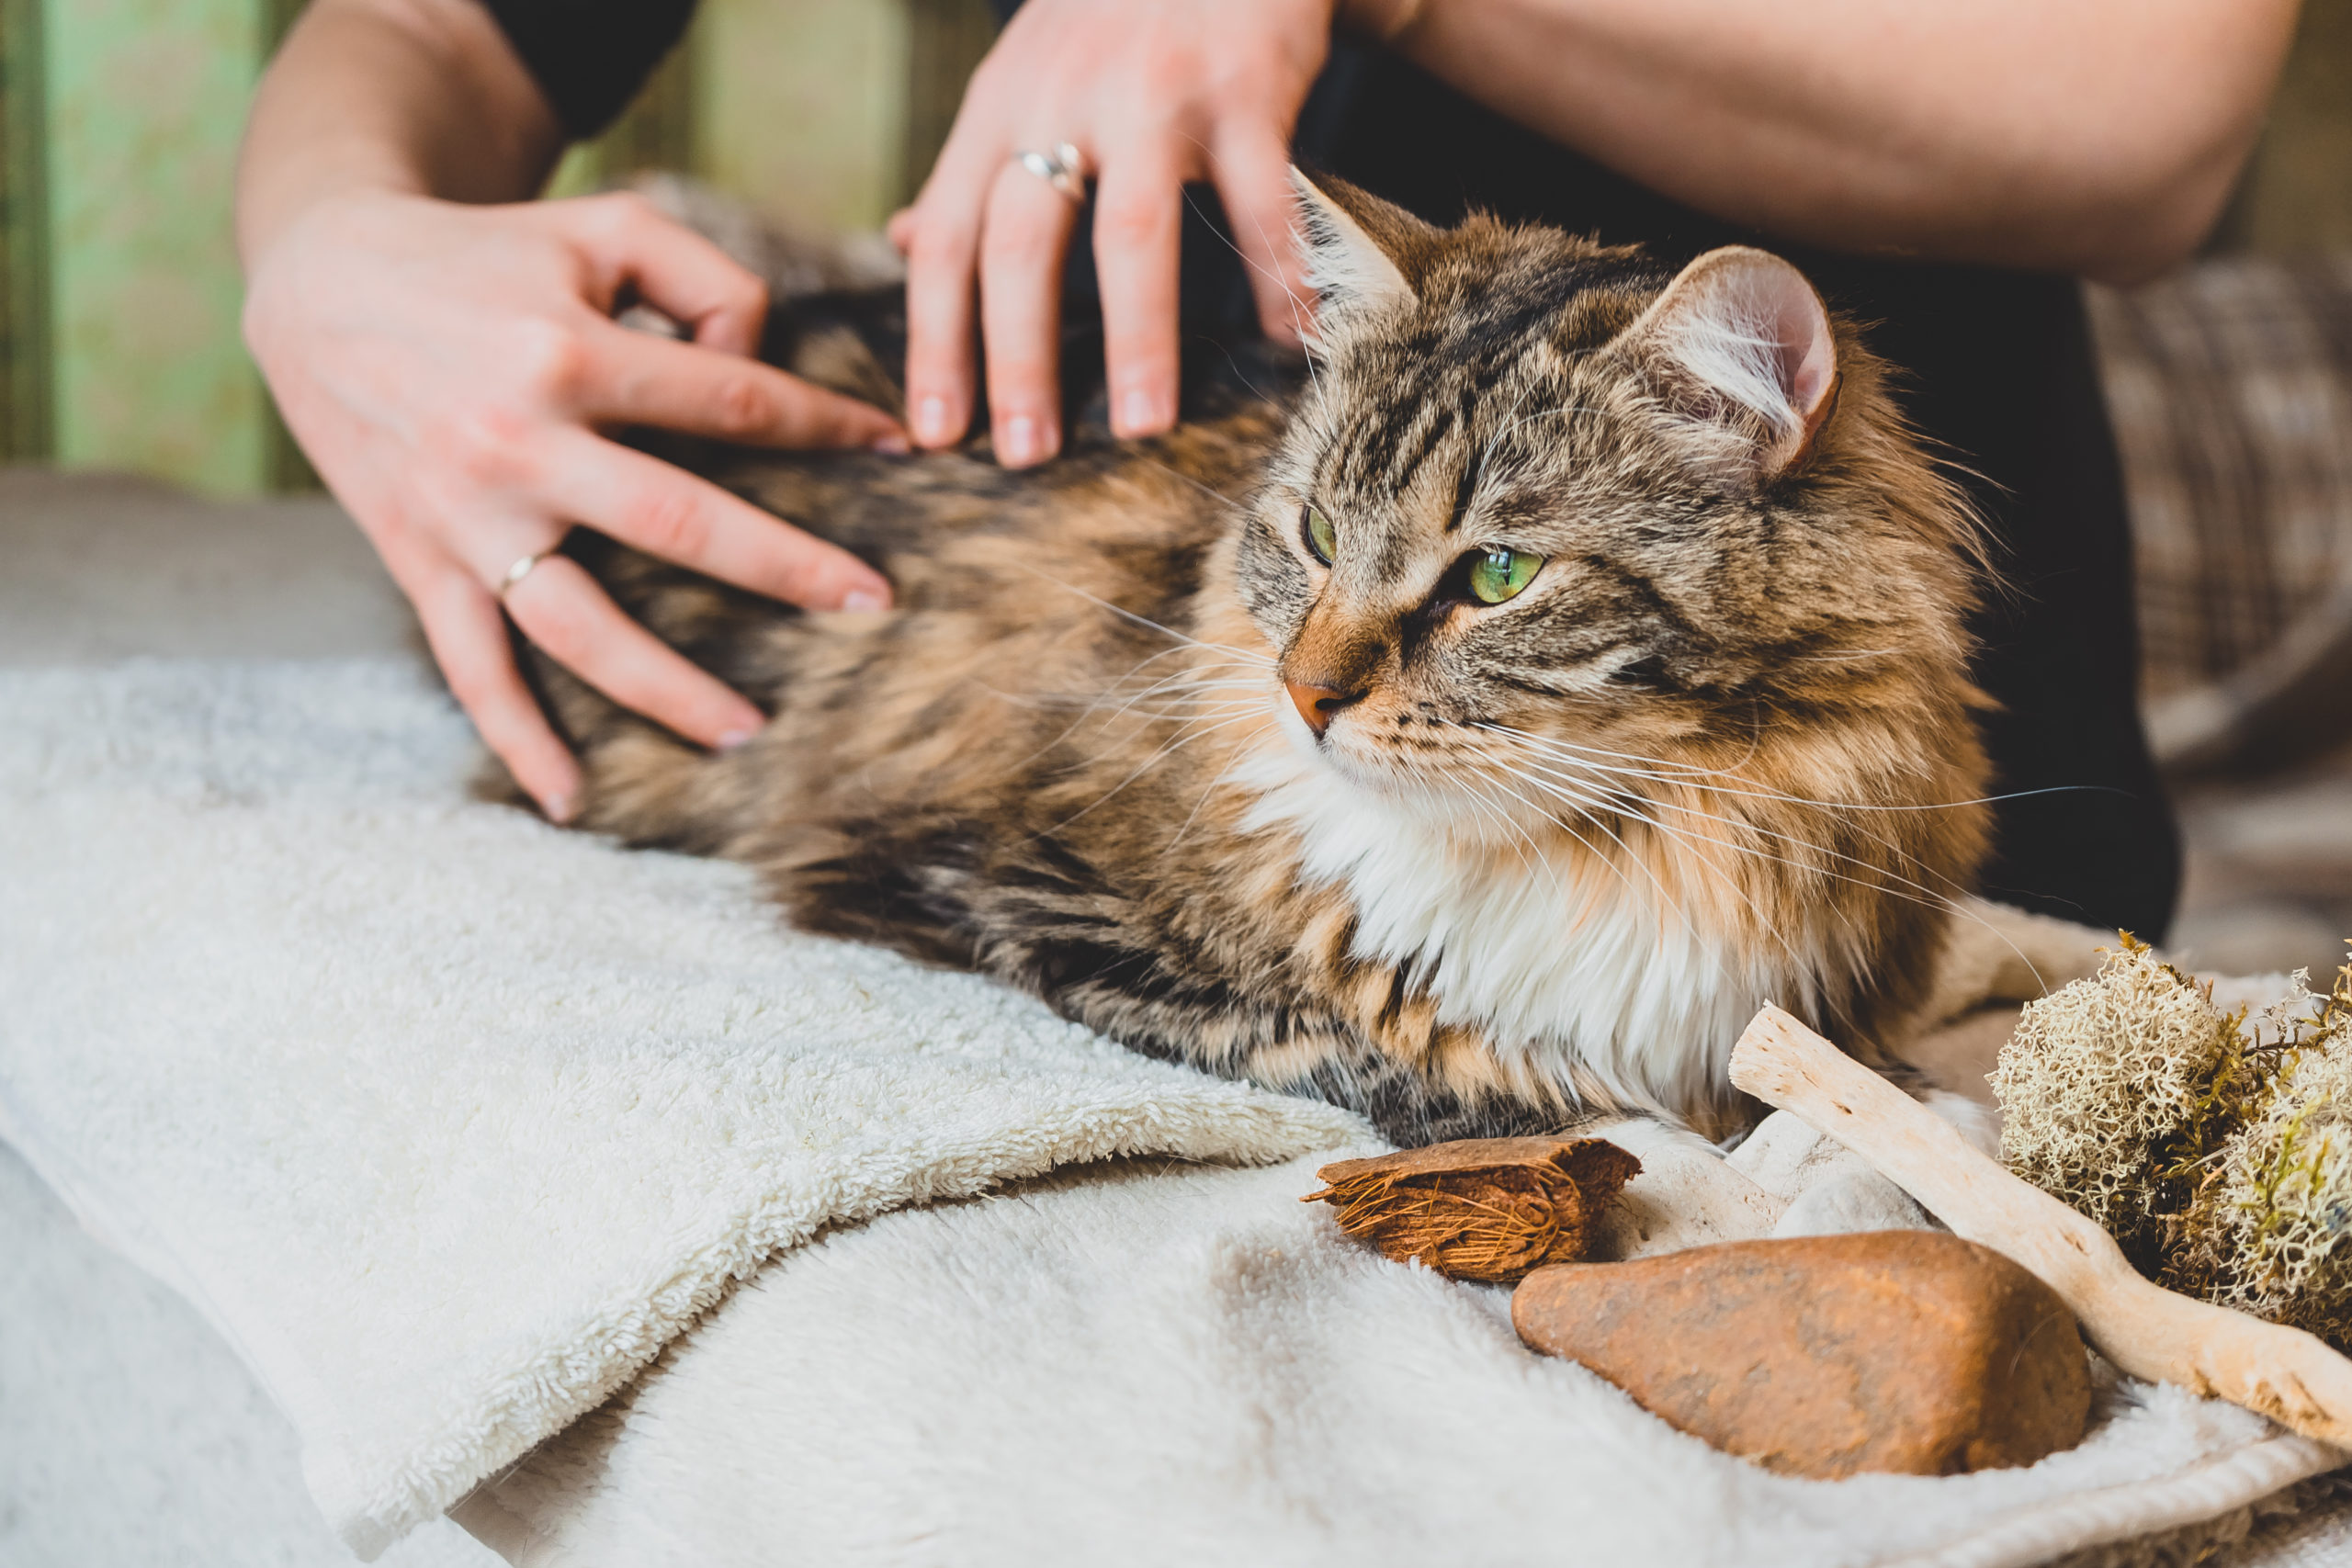 Massage the Siberian cat's body with your fingertips.